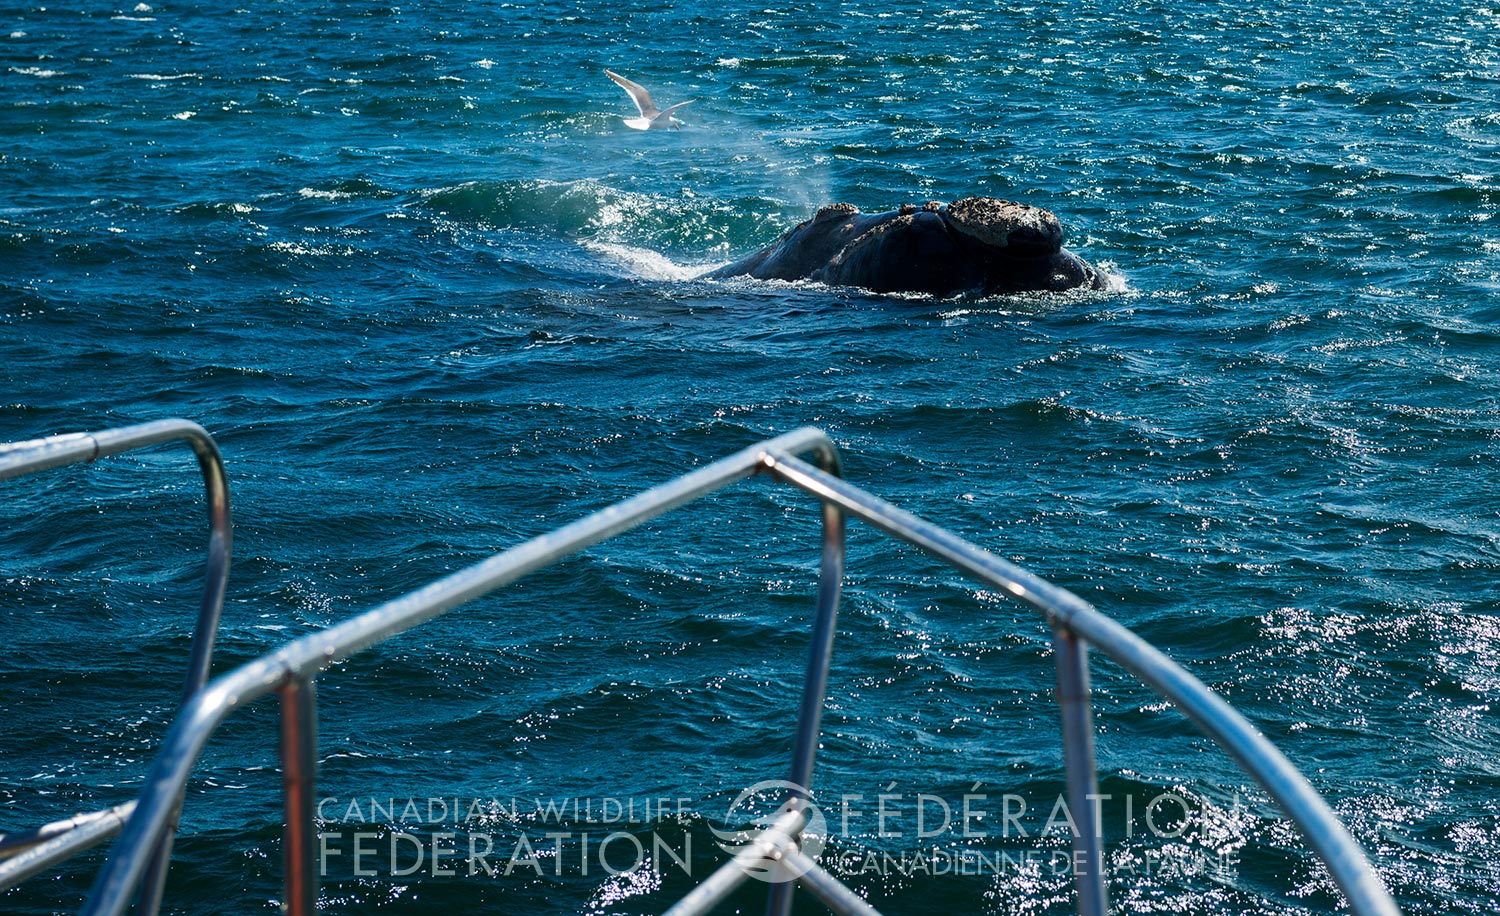 Less is known about the impact small vessels have on right whales